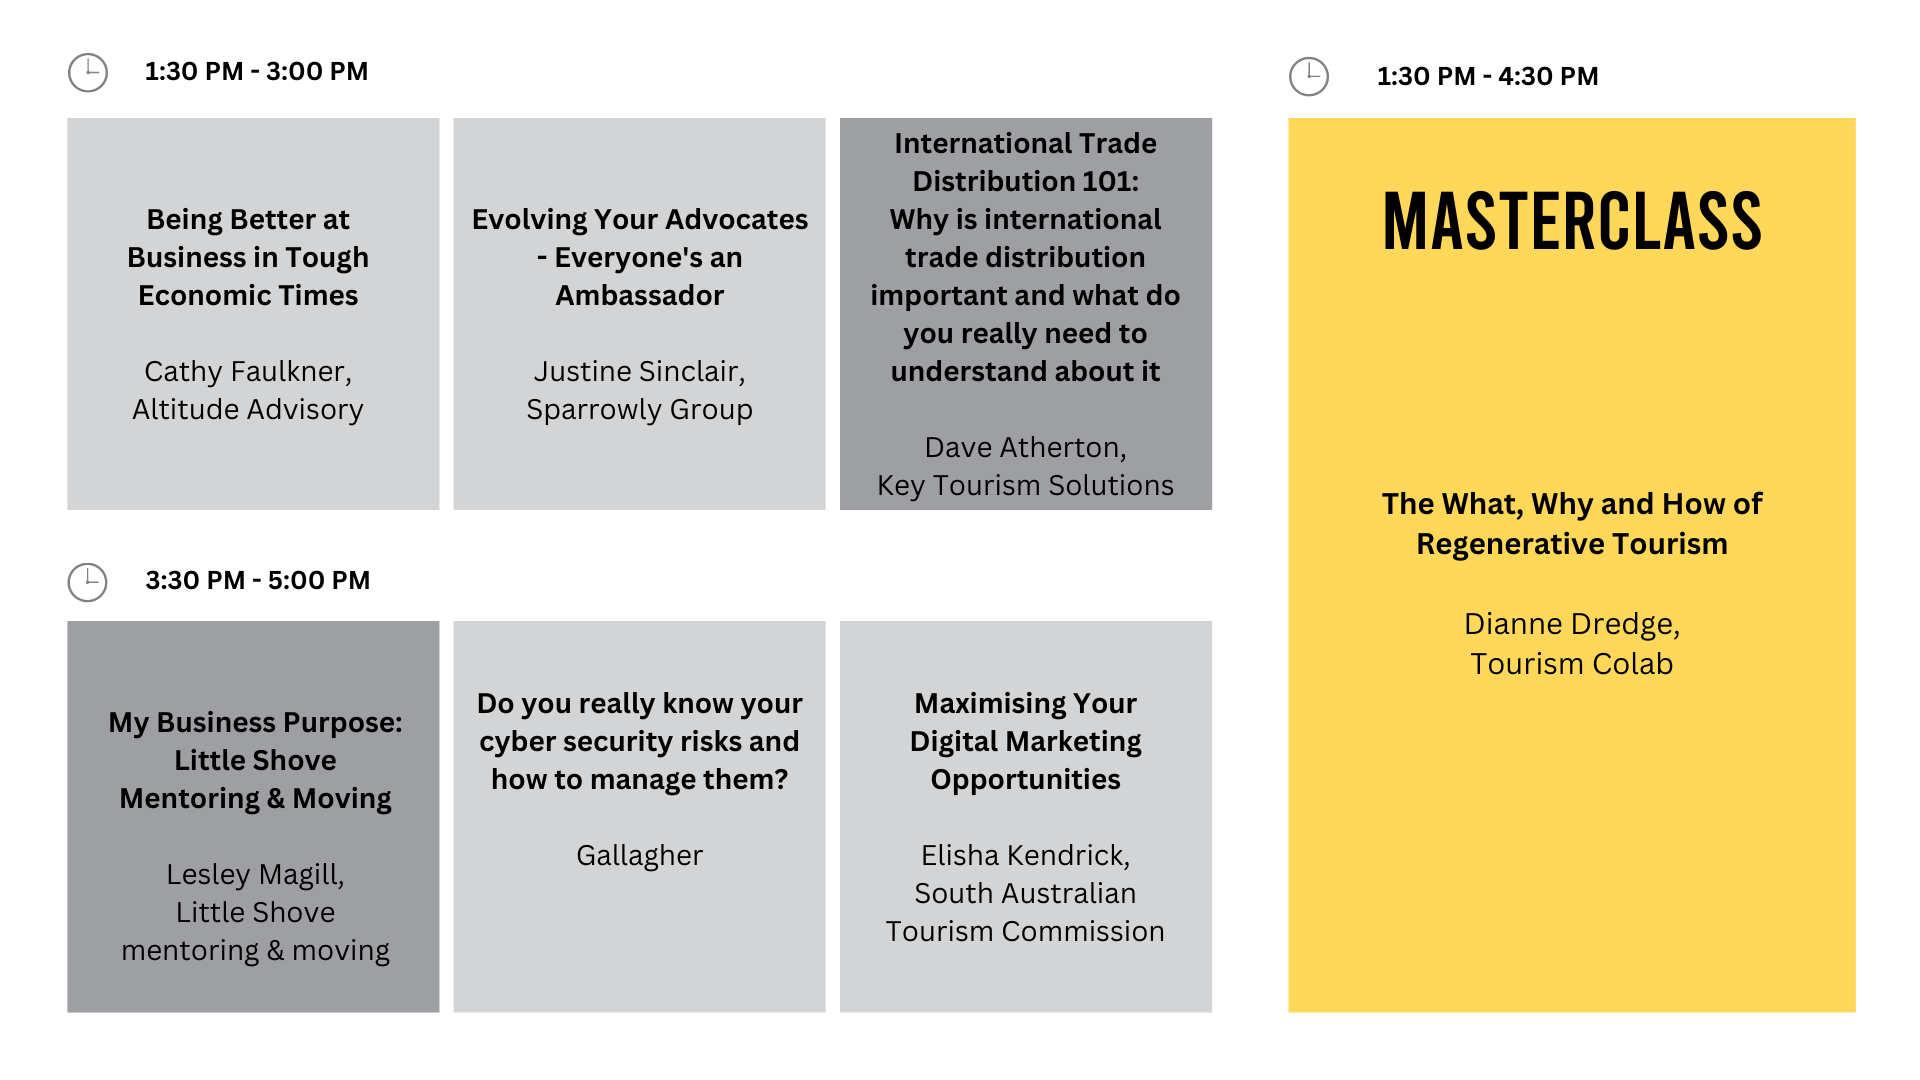 A visual overview of the workshops and masterclass' topics along with their respective speaker in the afternoon session